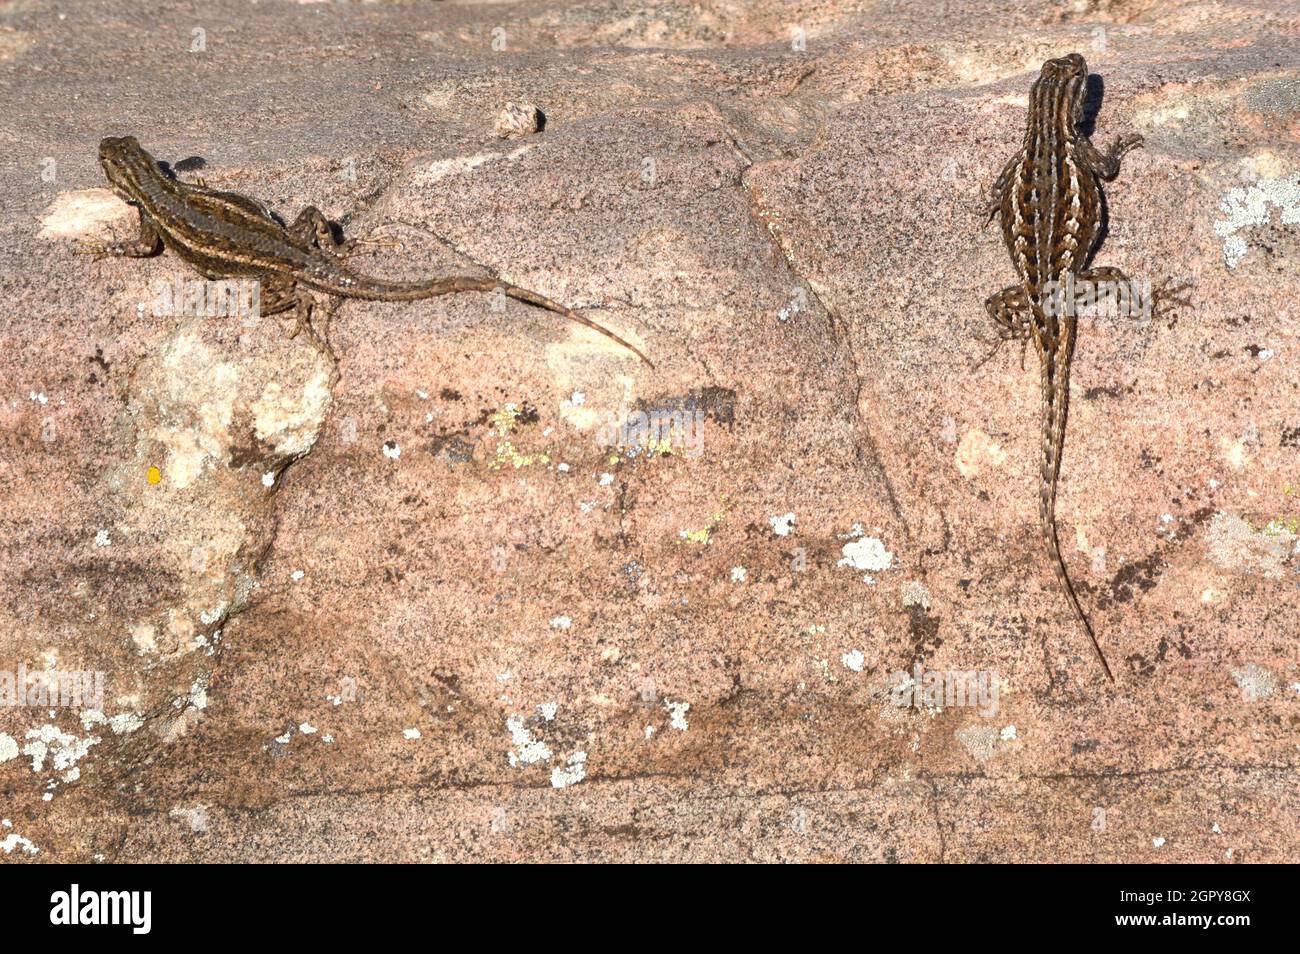 A pair of sagebrush lizards (Sceloporus gracious) soak up the warming sun on a rock in New Mexico. Stock Photo